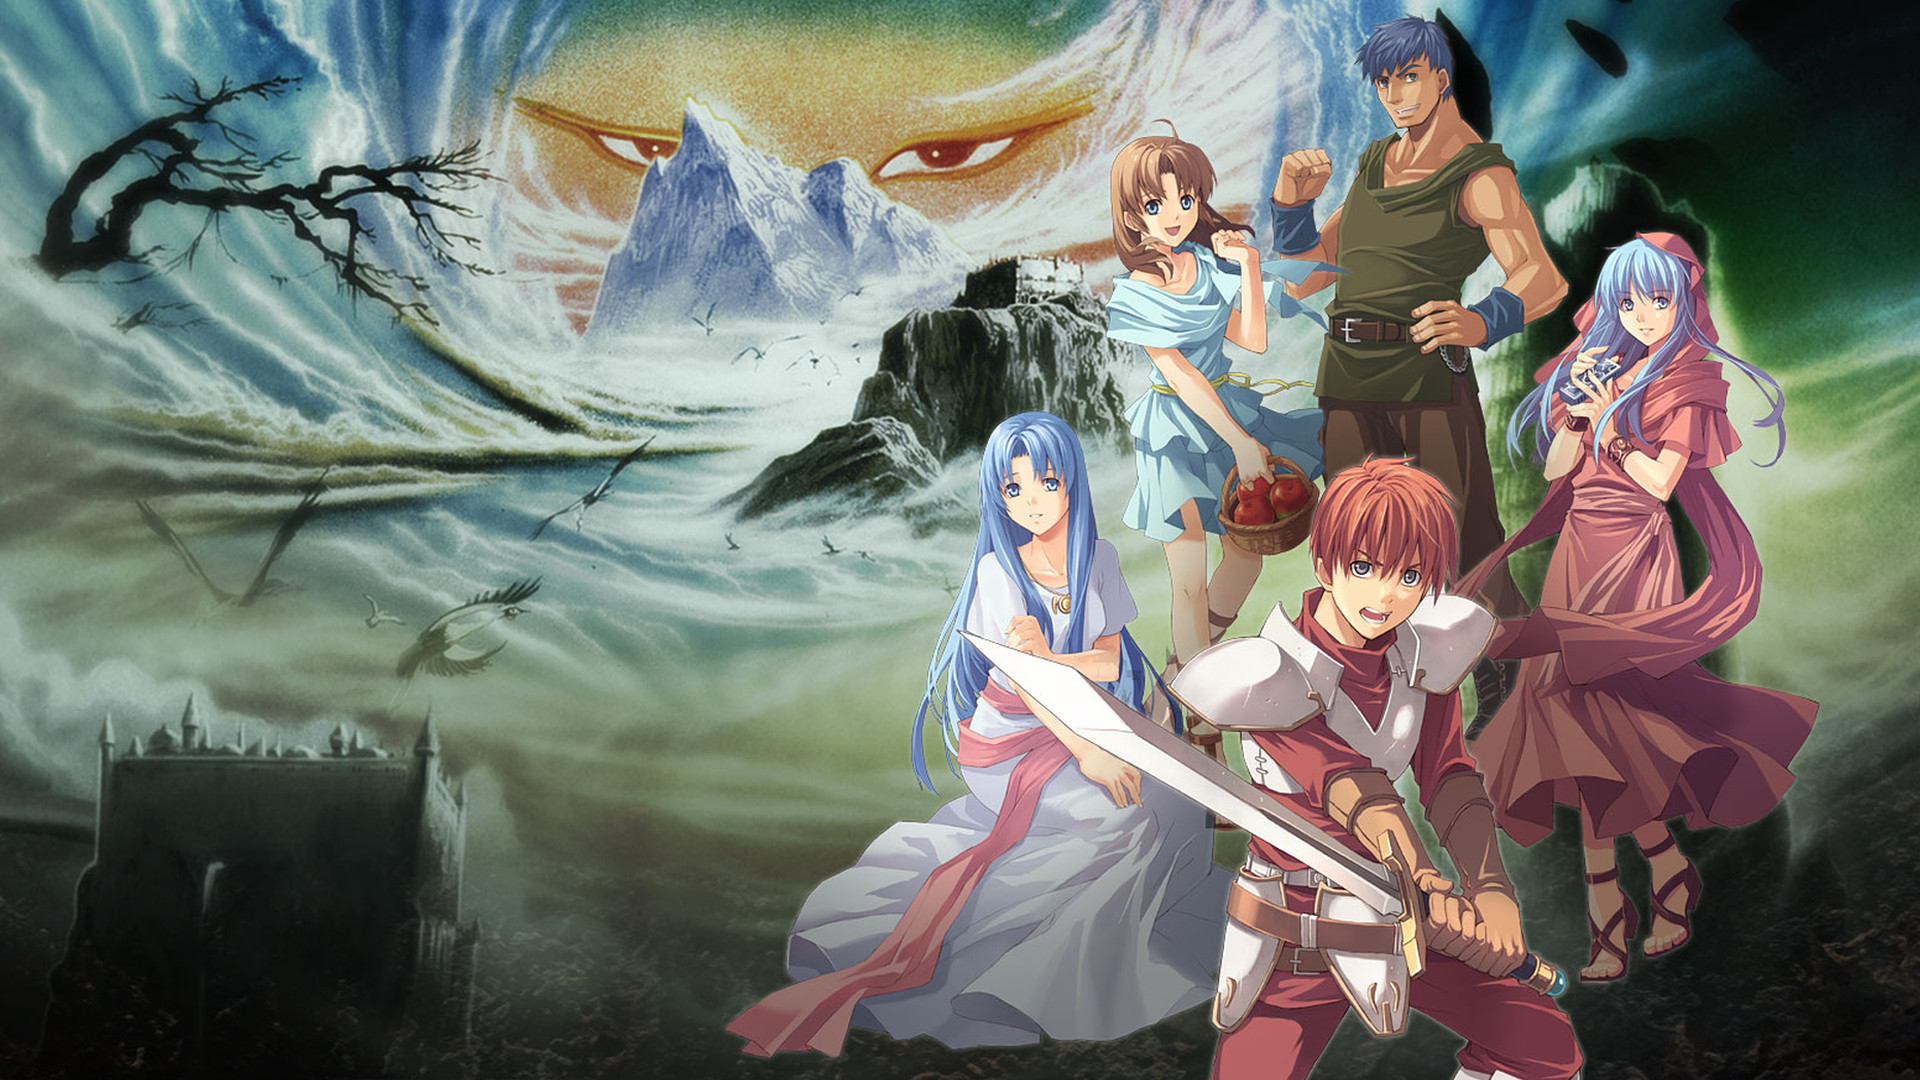 Video Game Ys II: Ancient Ys Vanished The Final Chapter HD Wallpaper | Background Image